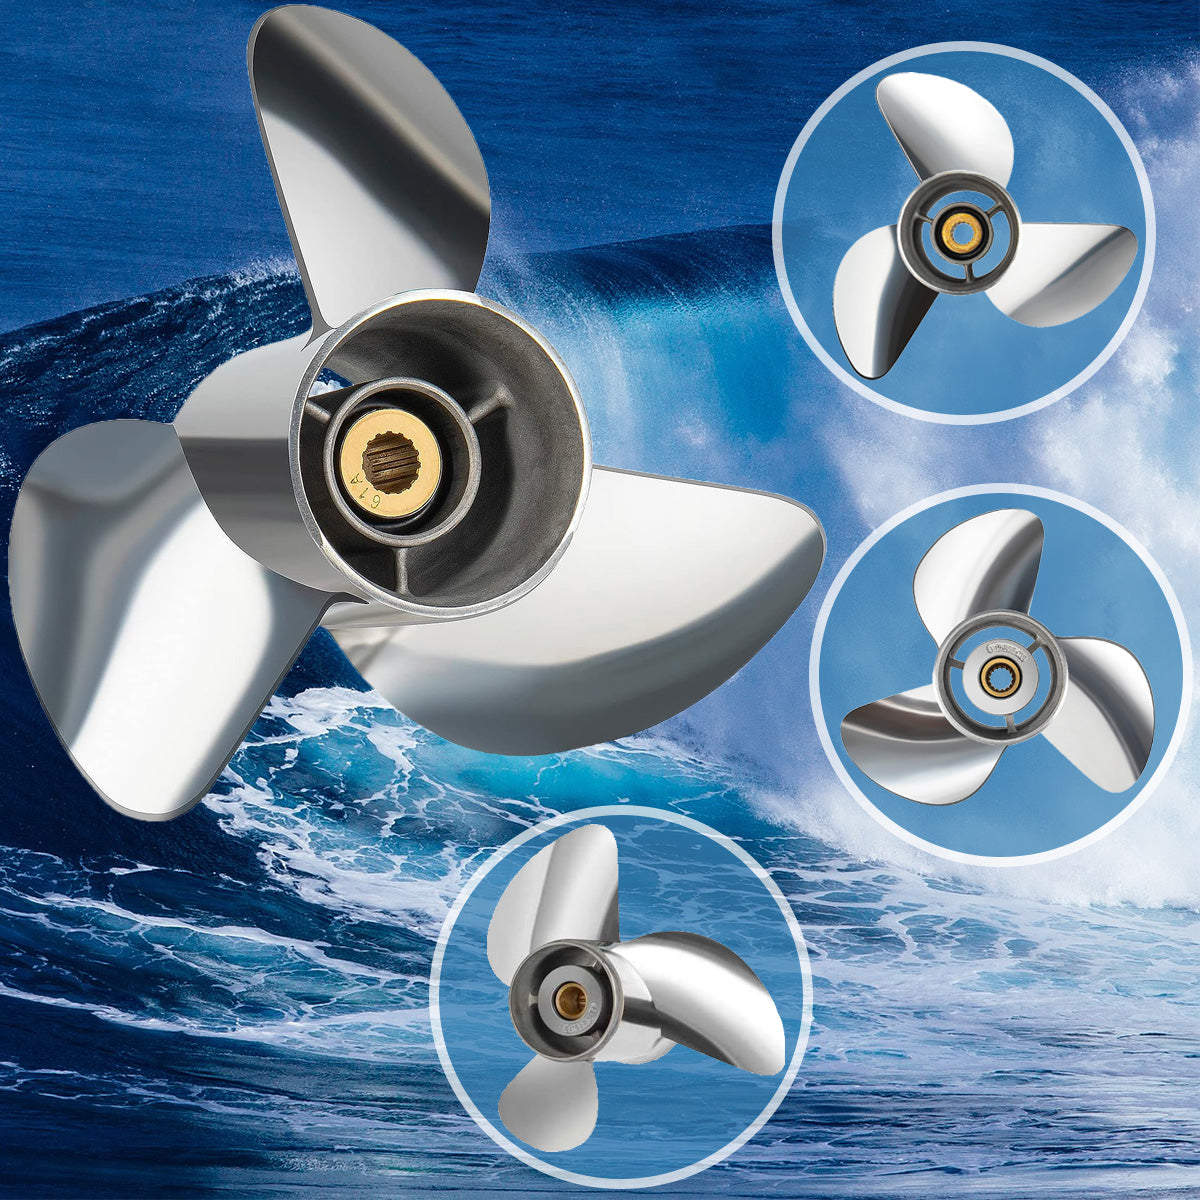 VIF  OEM Upgrade 13 3/4 x 17,13 3/4 x 19, 13 3/4 x 21, 13 3/8 23 Series Stainless Steel Propeller for Yamaha Outboard Motos 150-250 HP, 15 Spline Tooth, RH